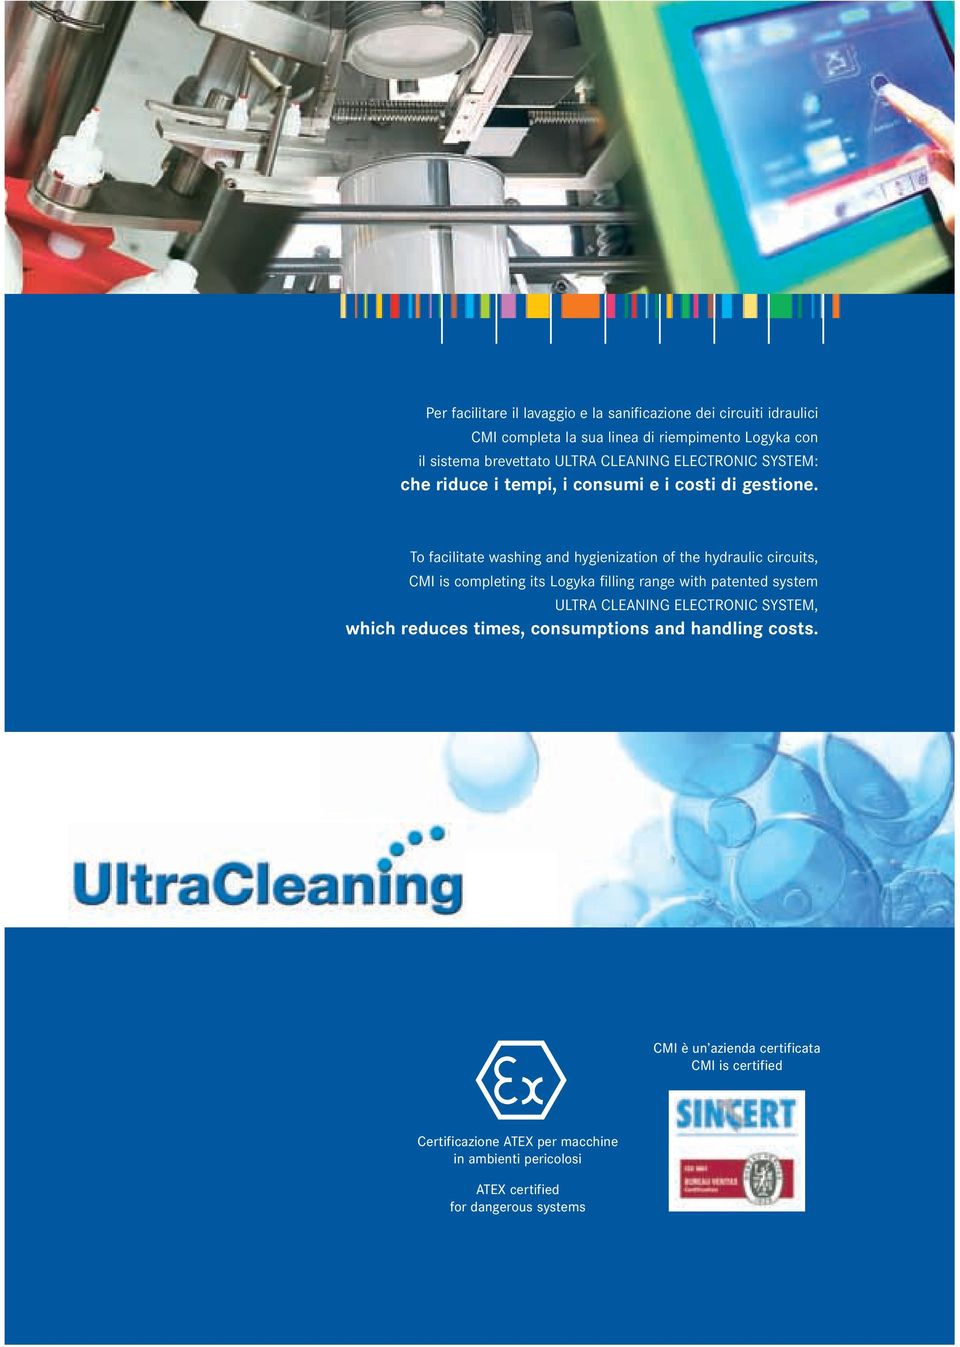 To facilitate washing and hygienization of the hydraulic circuits, CMI is completing its Logyka filling range with patented system ULTRA CLEANING